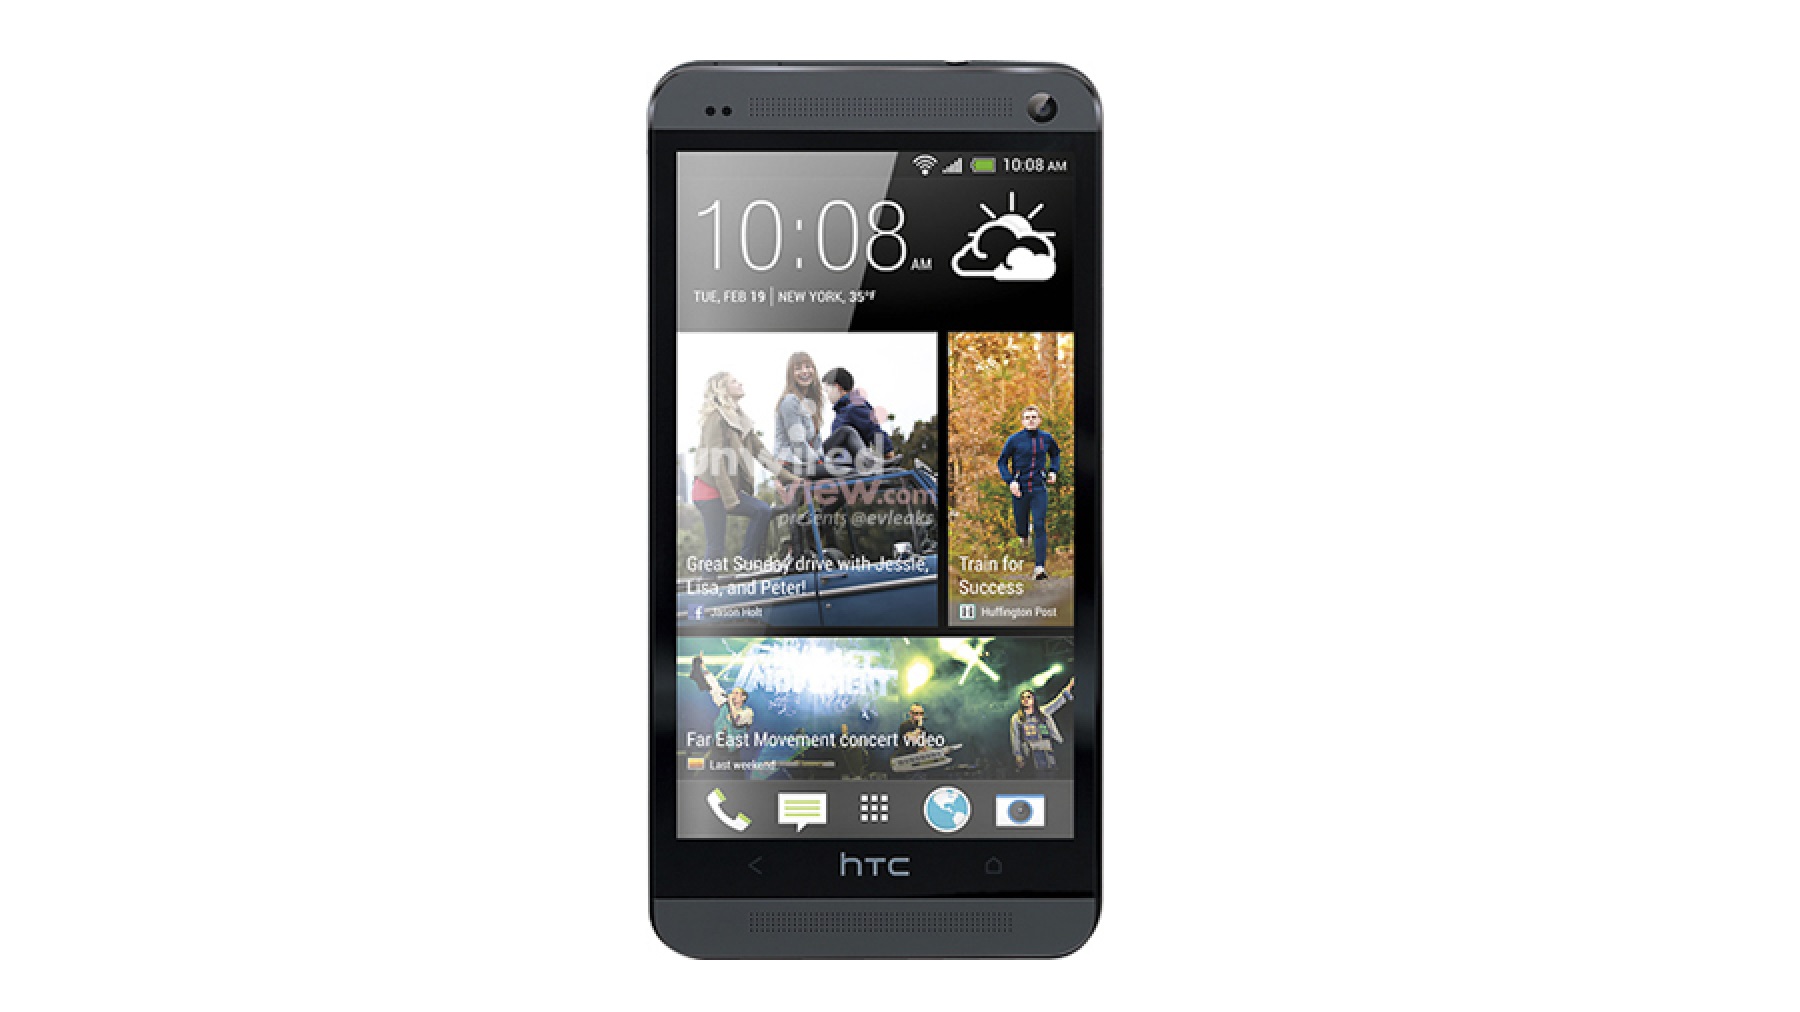 HTC Will Officially Unveil the M7 at CES 2013